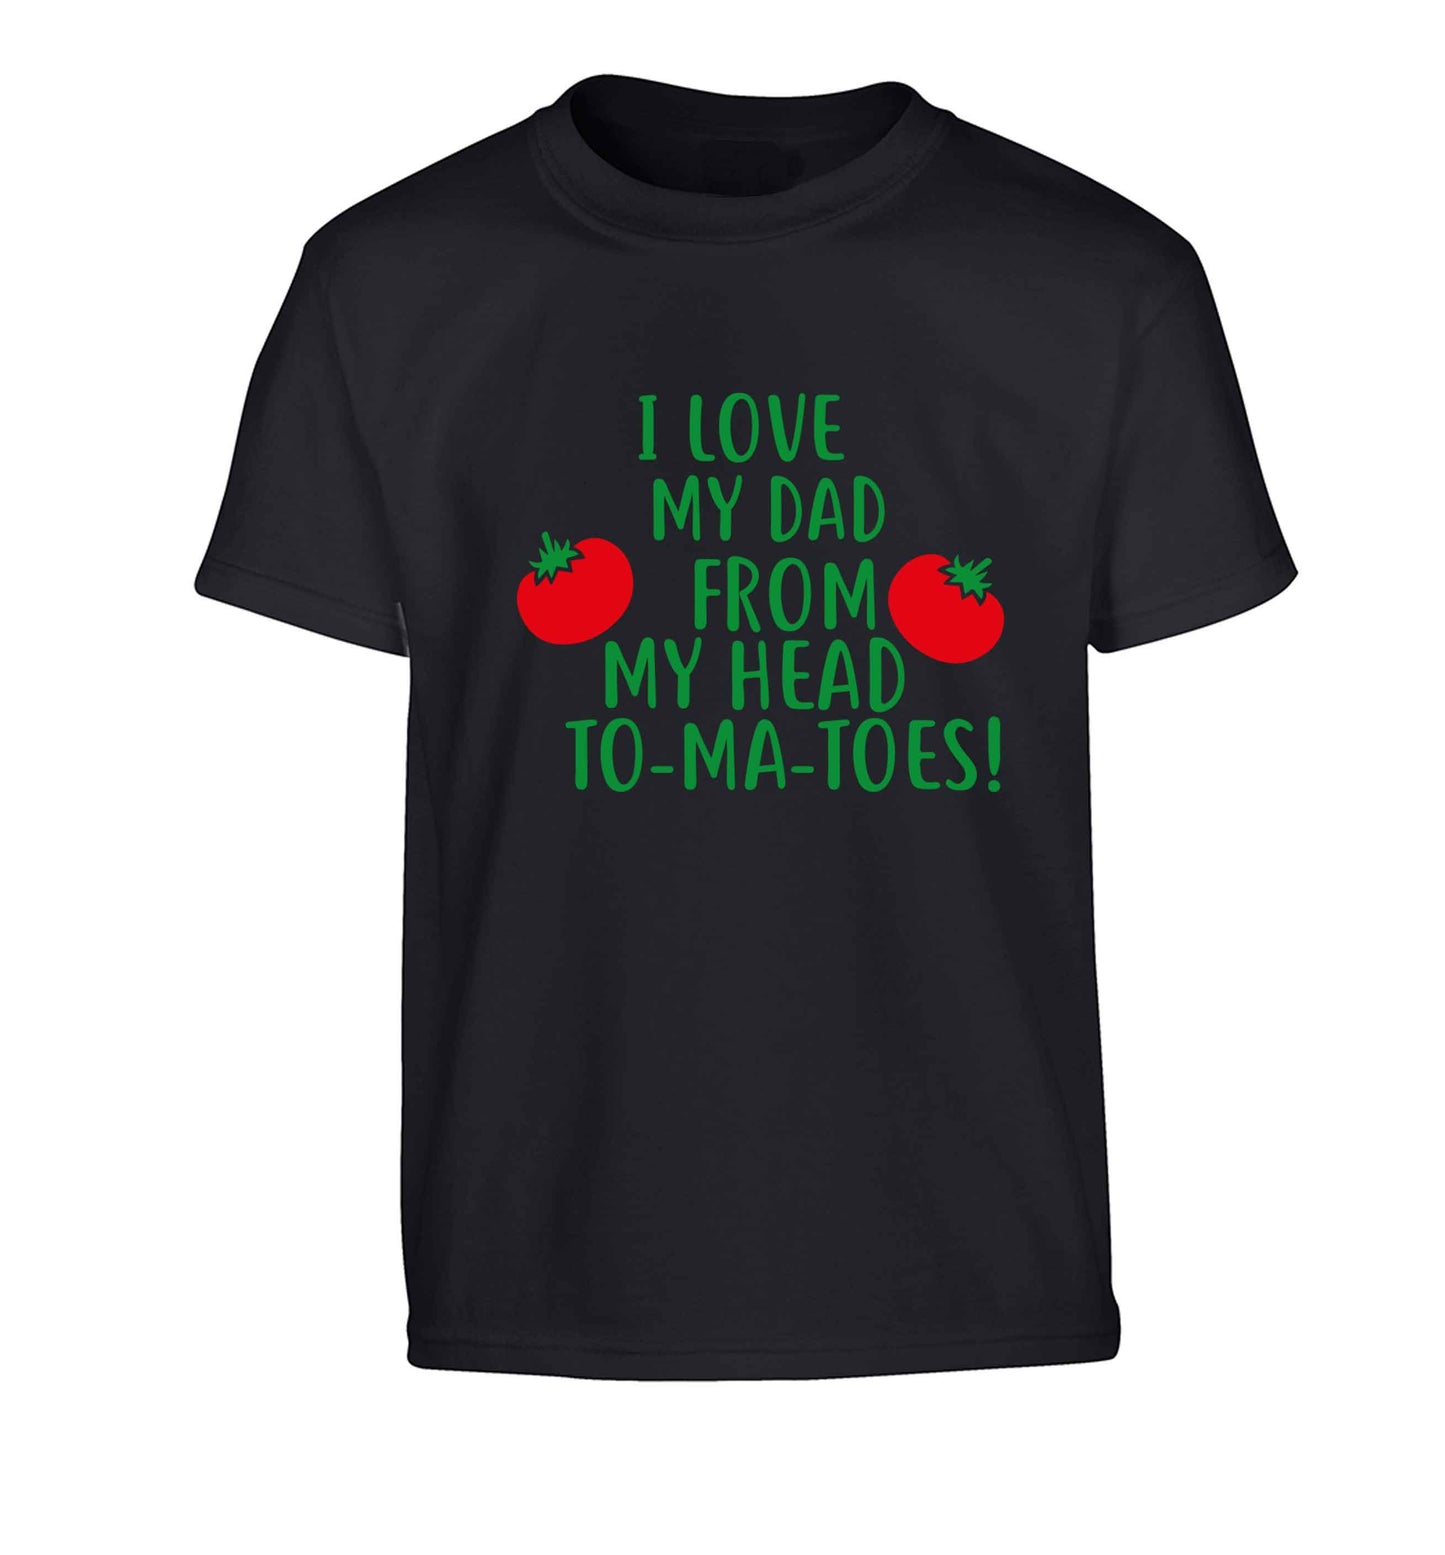 I love my dad from my head to-ma-toes Children's black Tshirt 12-13 Years